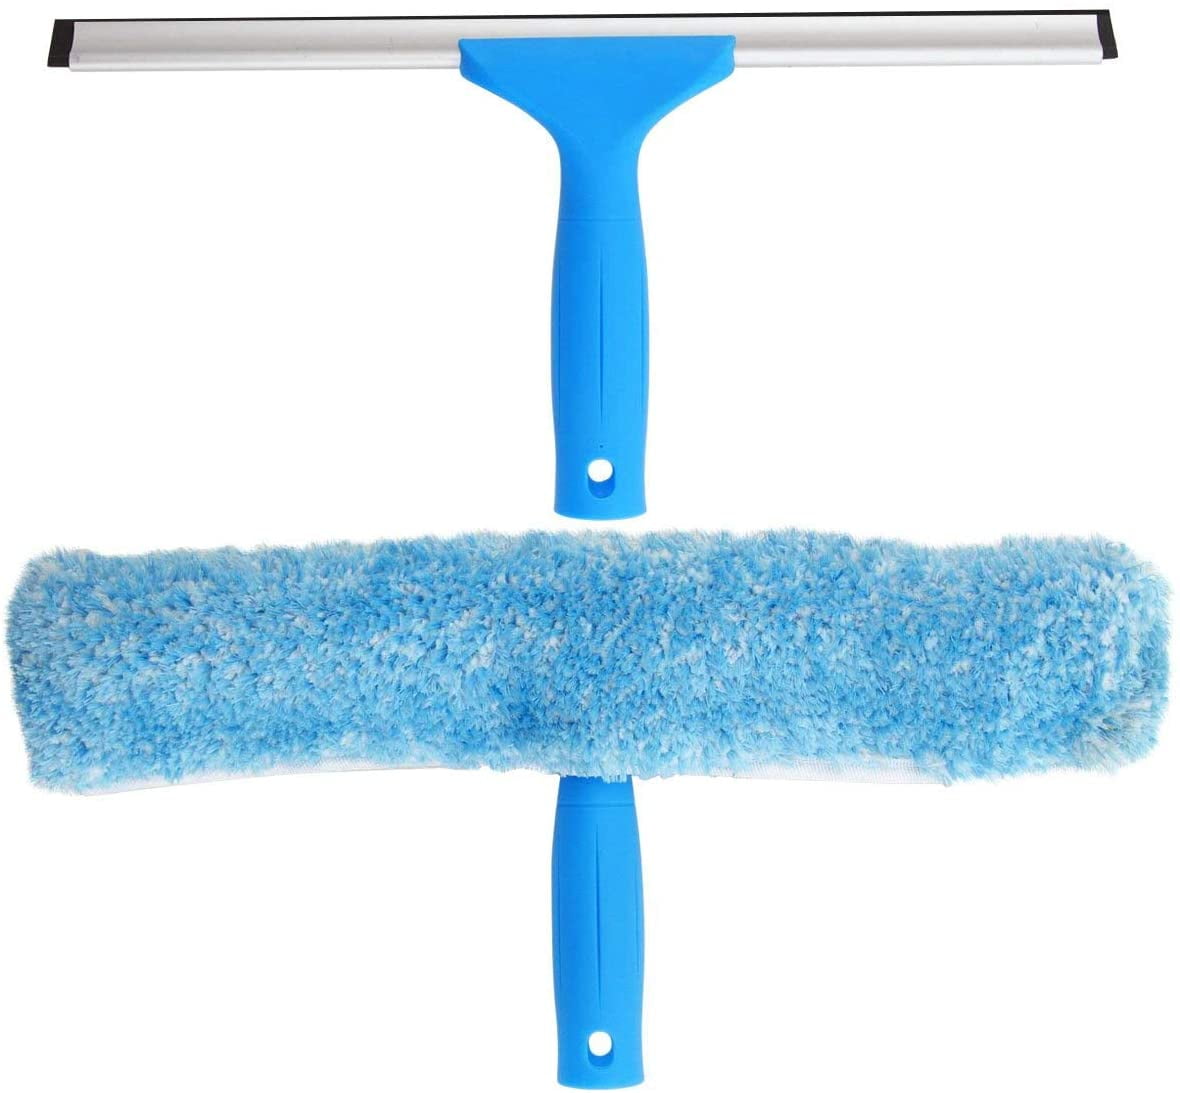 SweetCandy Standard Professional All-Purpose Window Squeegee for